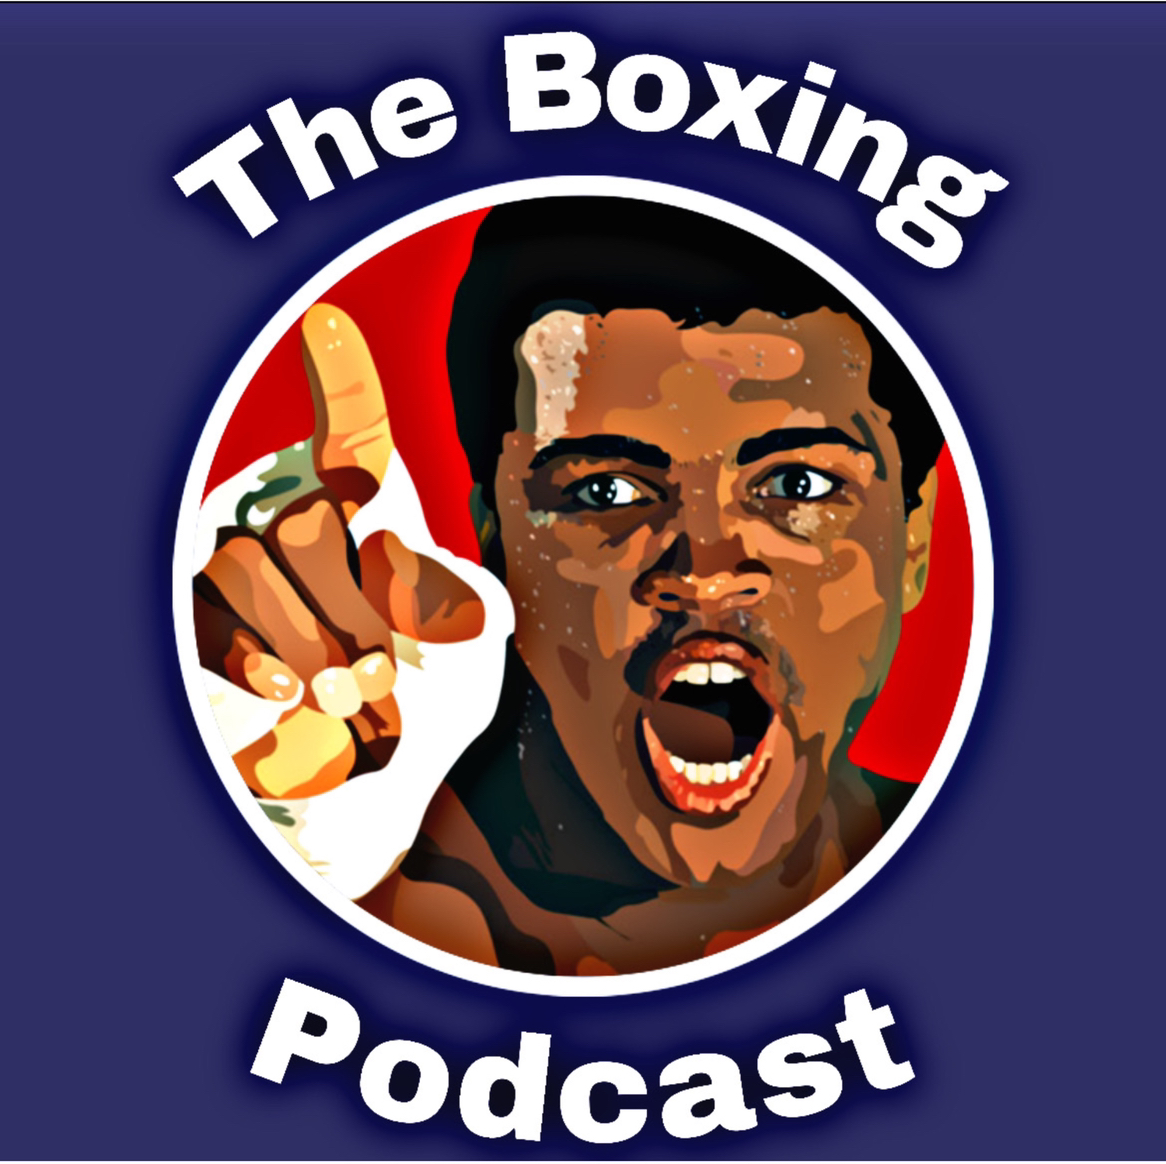 Stream The Boxing Podcast Listen to podcast episodes online for free on SoundCloud